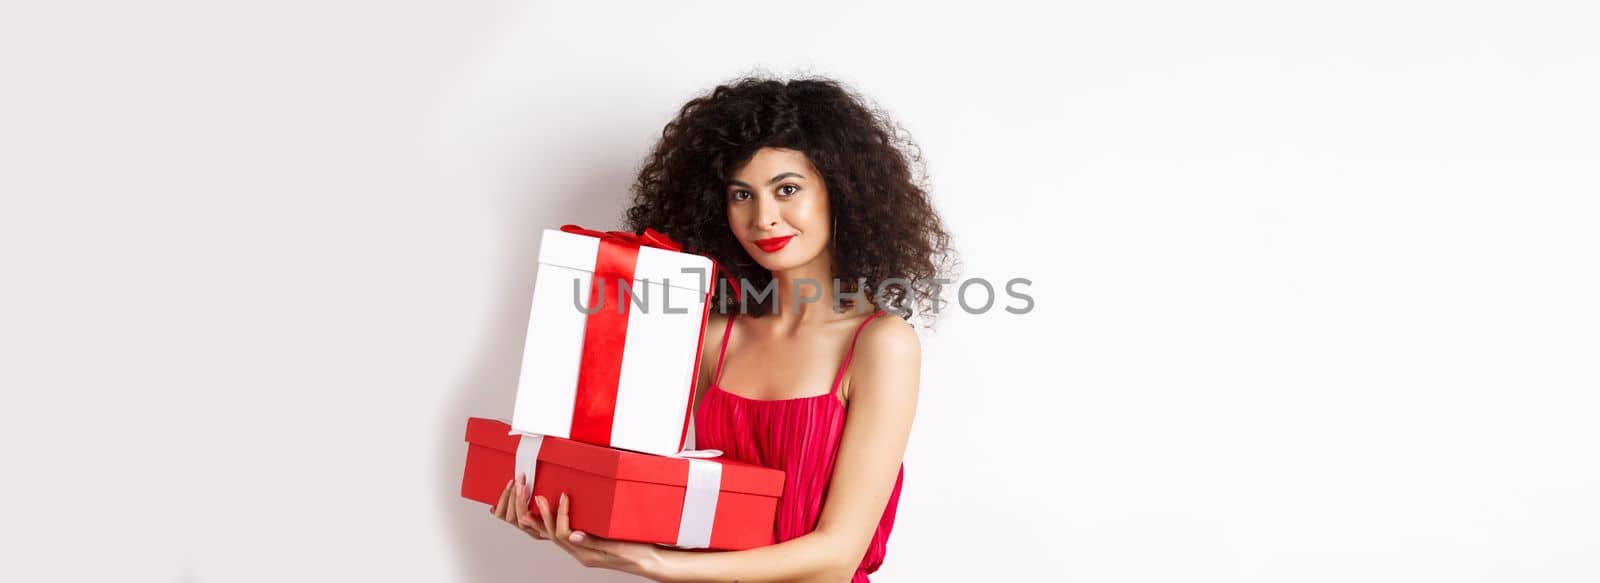 Elegant woman holding Valentines day gifts and smiling romantic at camera, standing in red dress on white background.